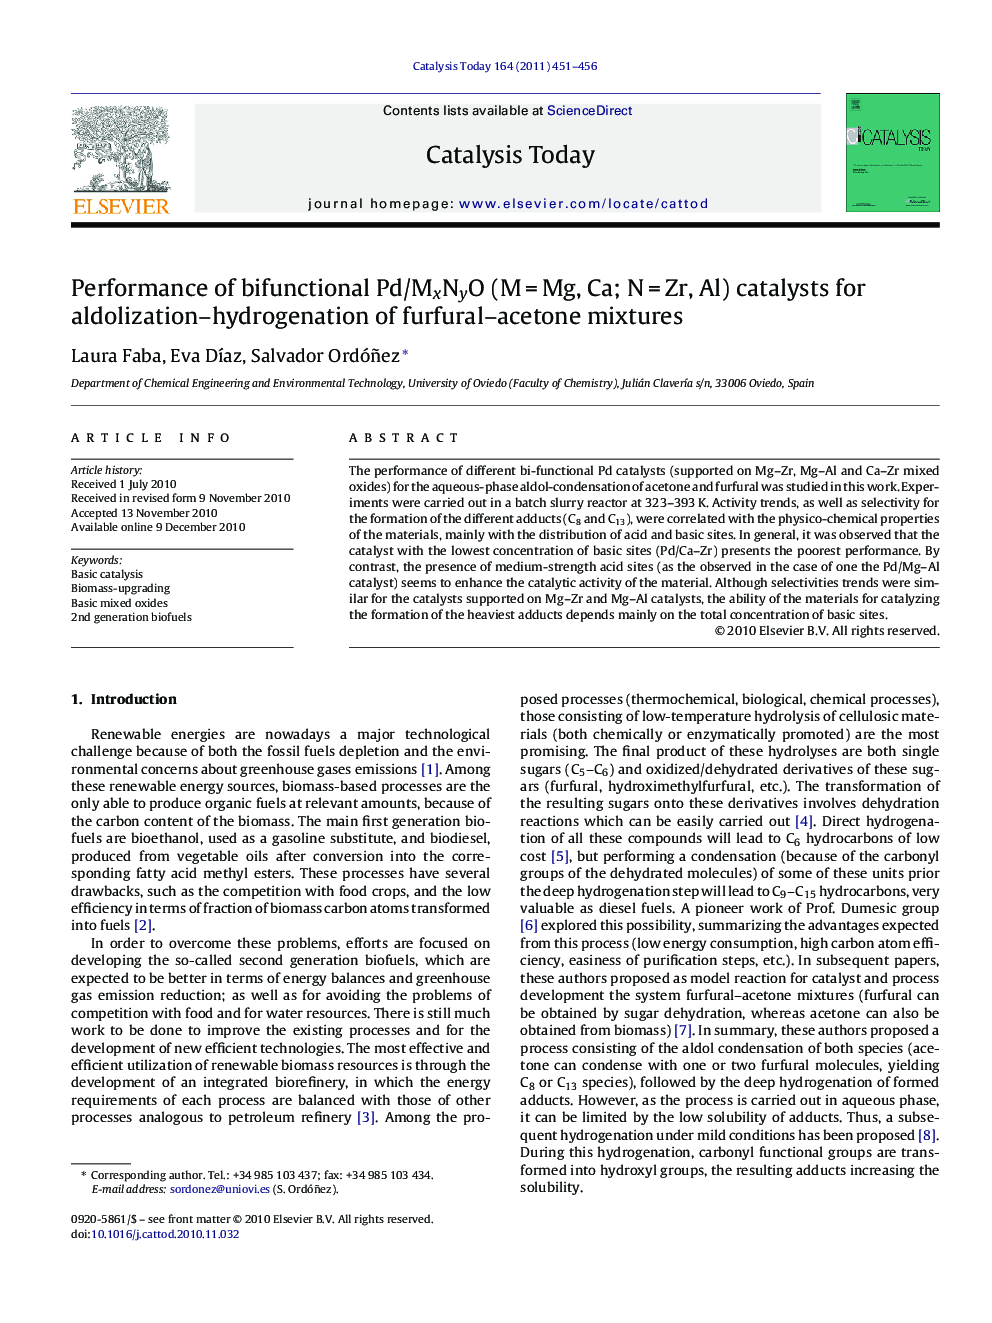 Performance of bifunctional Pd/MxNyO (M = Mg, Ca; N = Zr, Al) catalysts for aldolization–hydrogenation of furfural–acetone mixtures